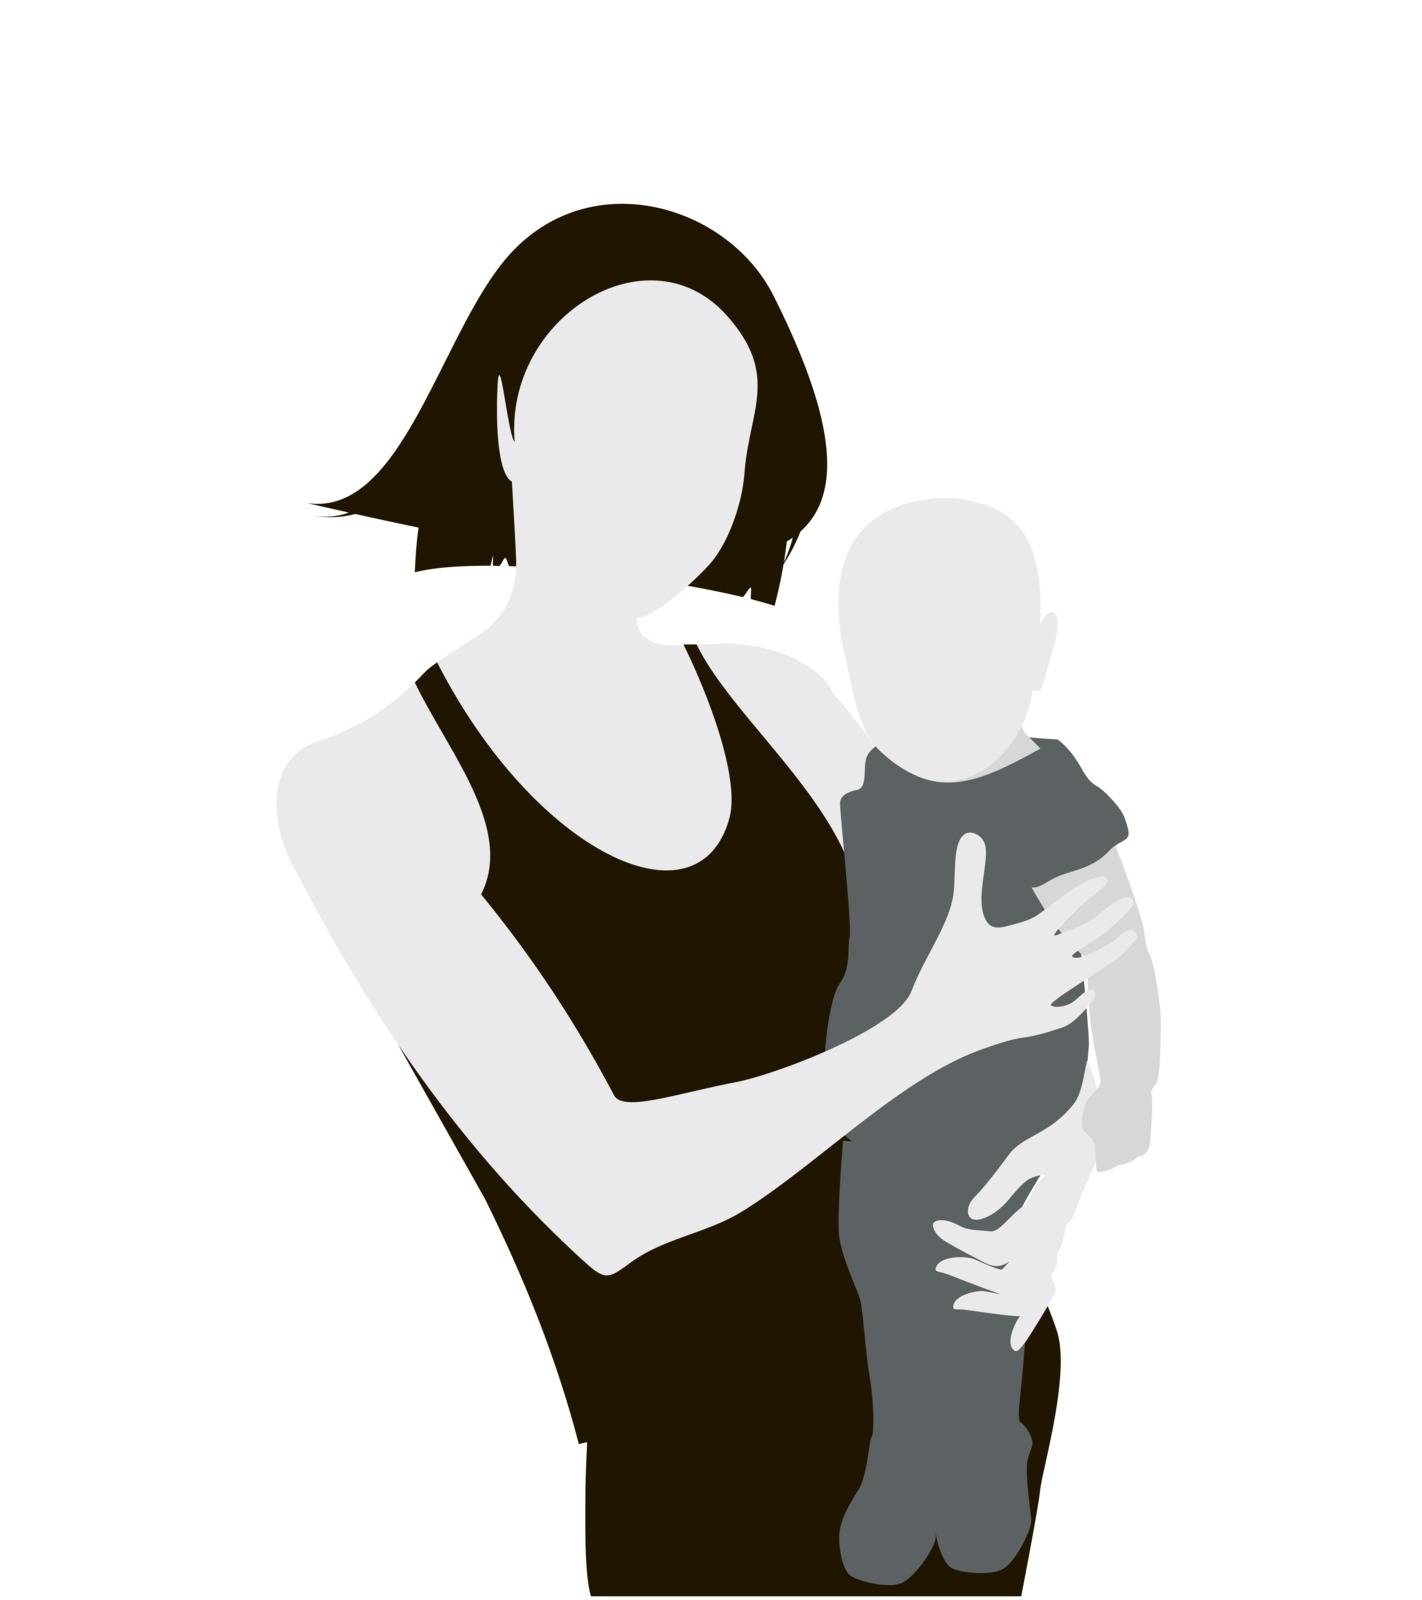 Woman with child silhouette. Vector illustration (eps 8)